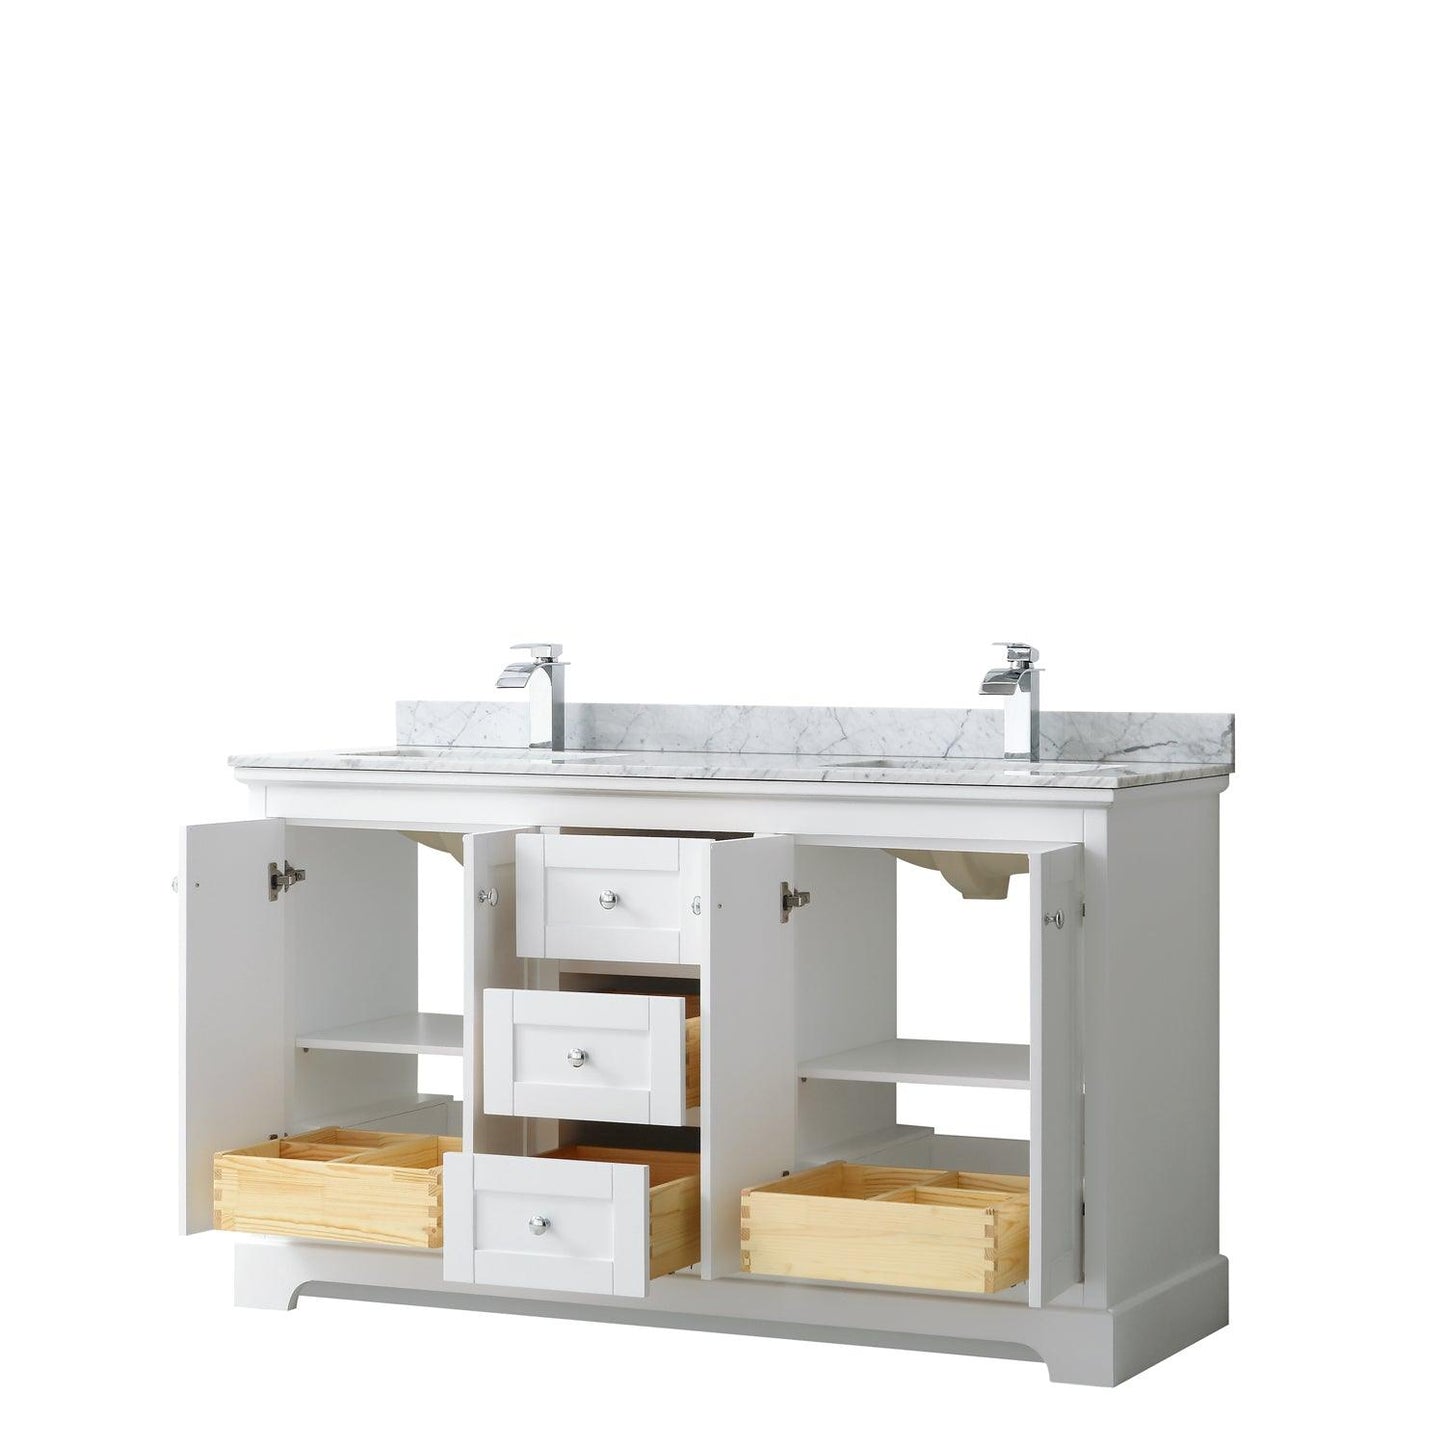 Wyndham Collection Avery Double Bathroom Vanity with White Carrara Marble Countertop, Undermount Square Sinks, Optional Mirror - Sea & Stone Bath